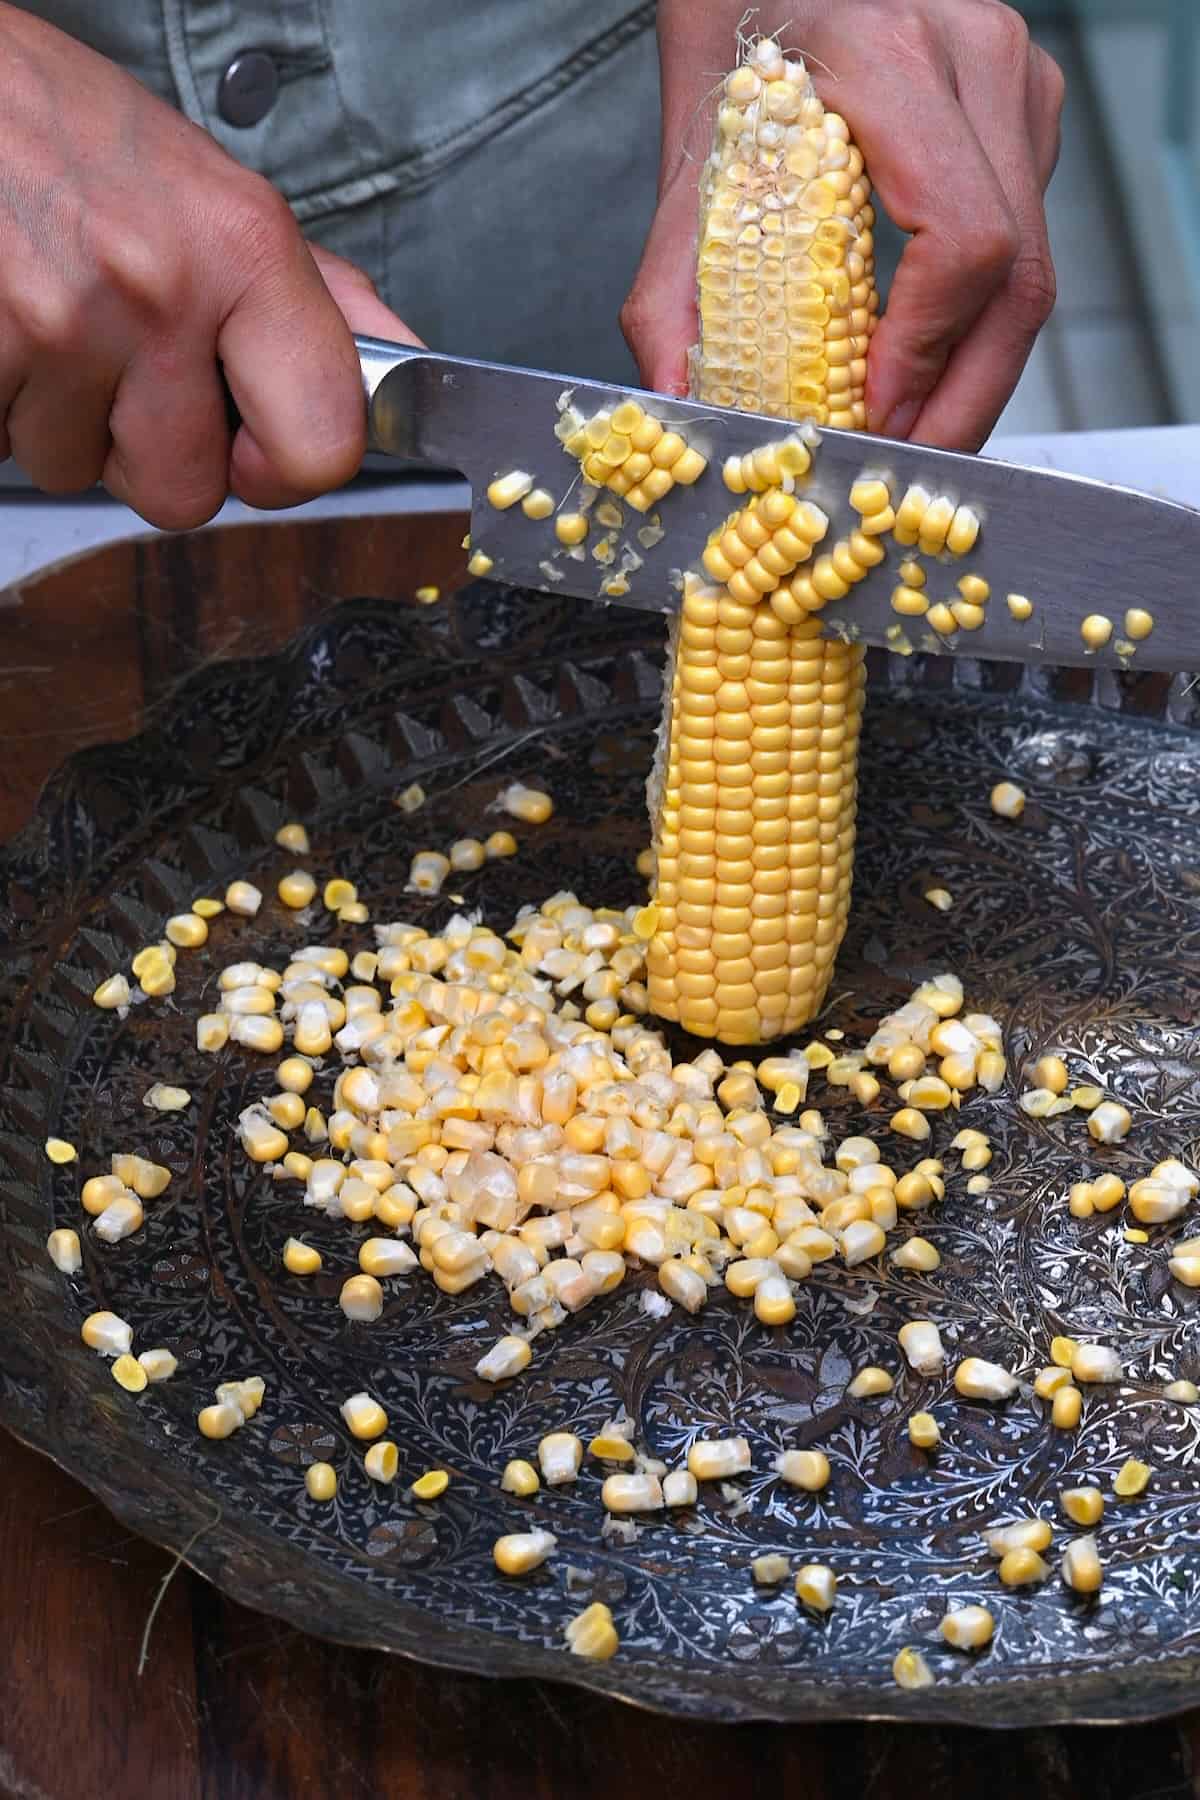 Removing kernels from corn ears